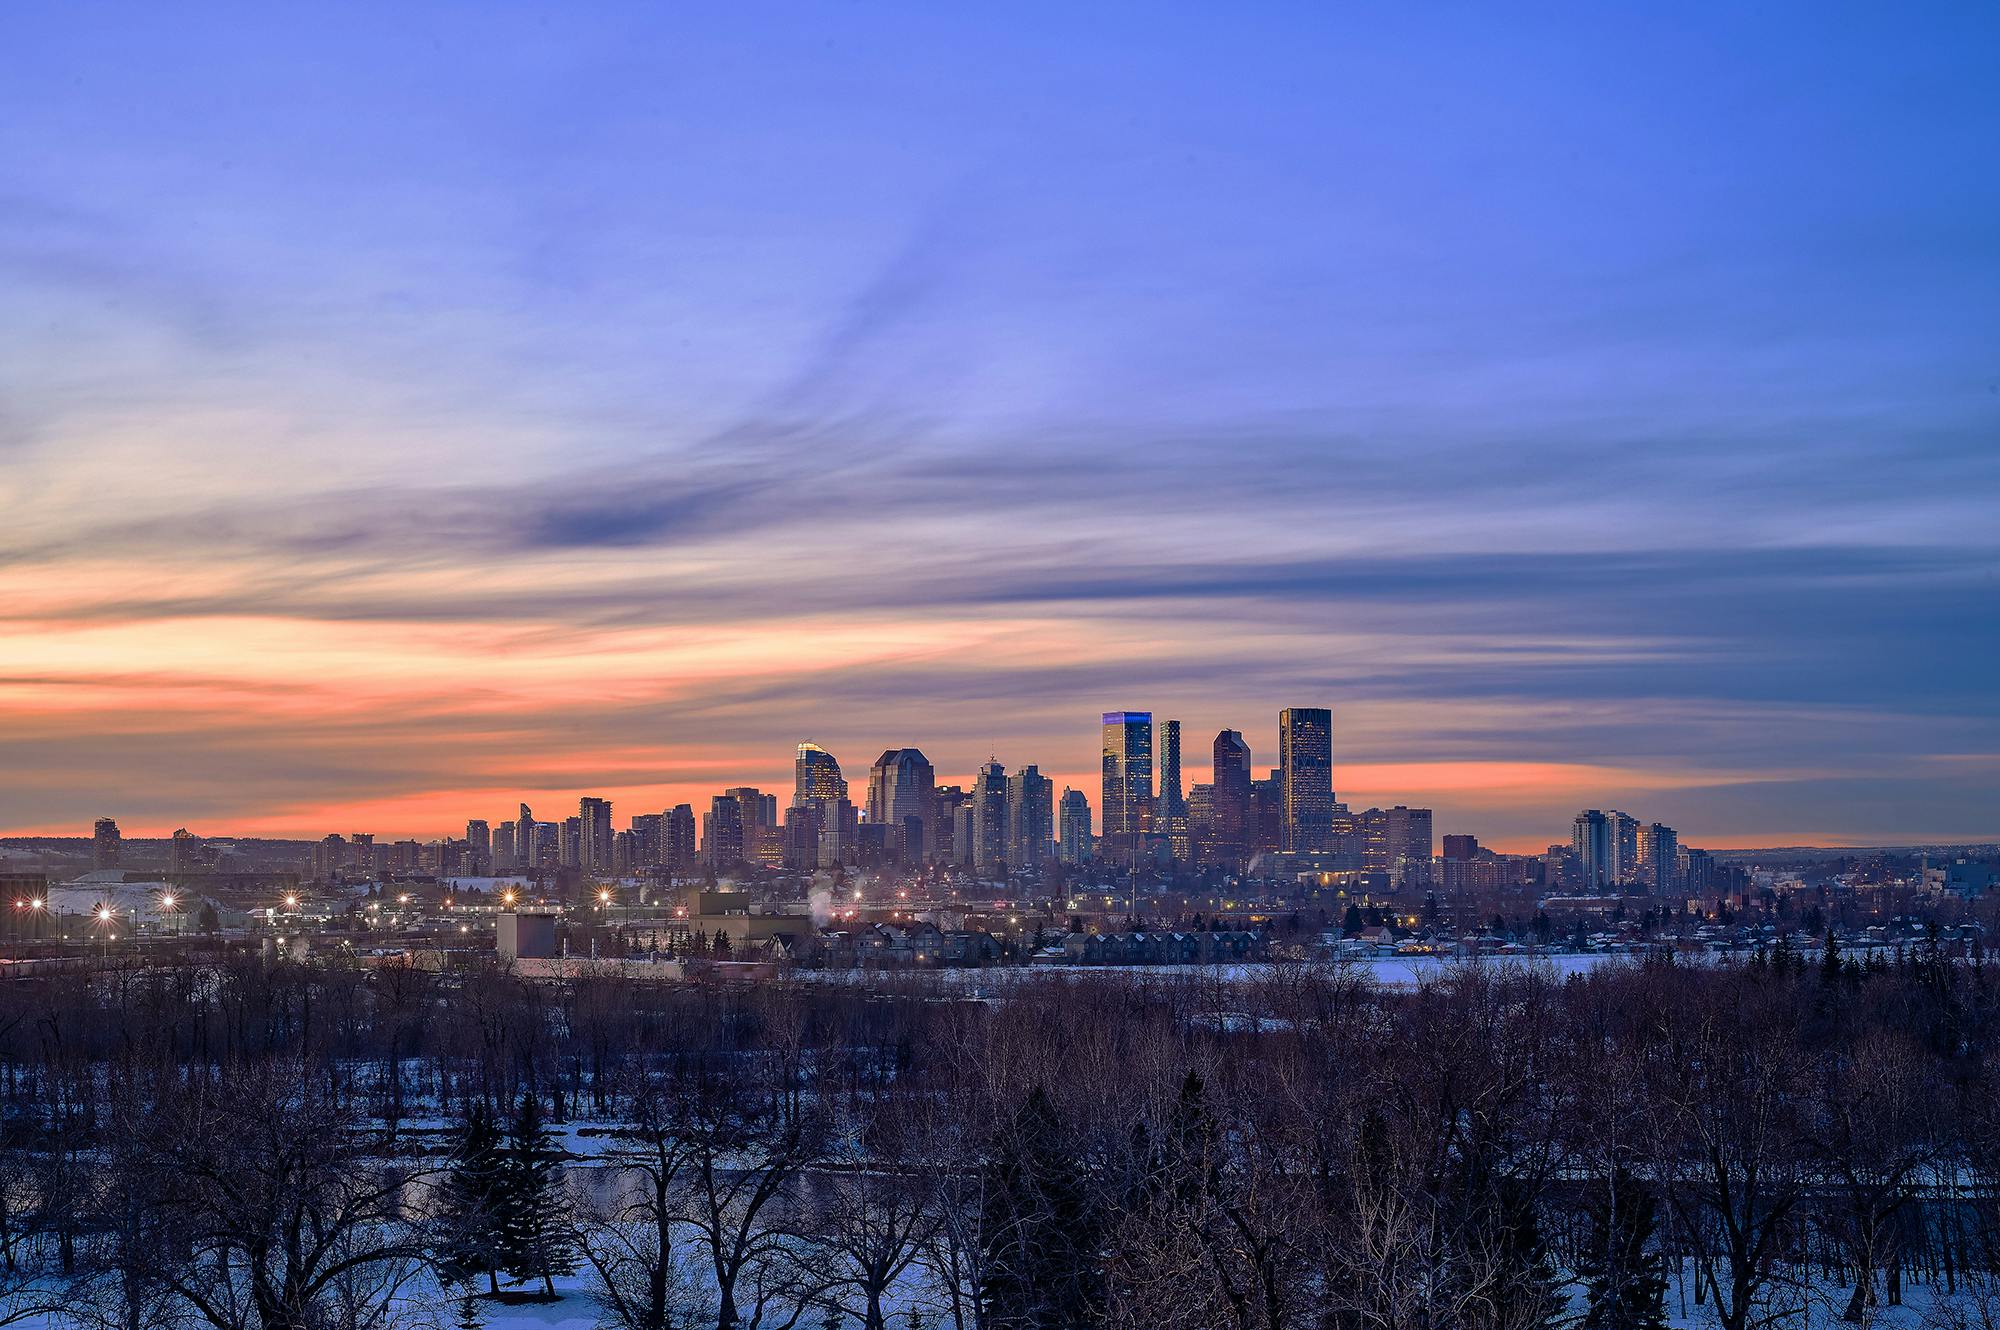 Downtown Calgary during sunset